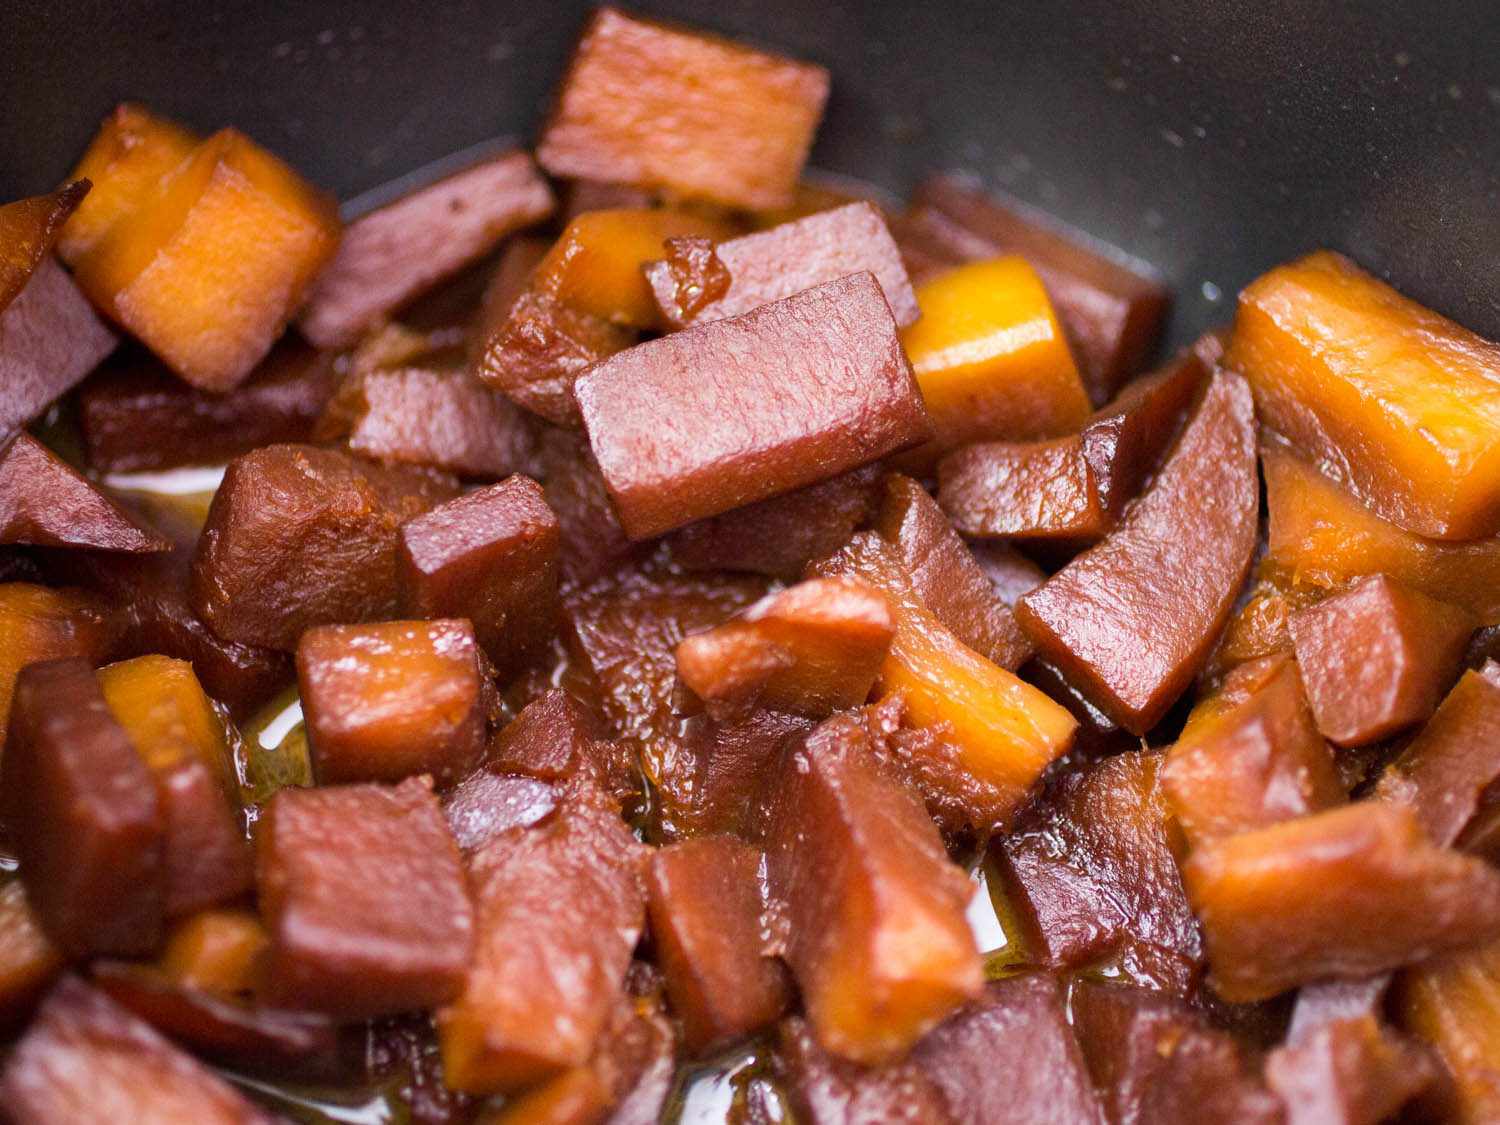 caramelized butternut squash cooked in a pressure cooker with baking soda